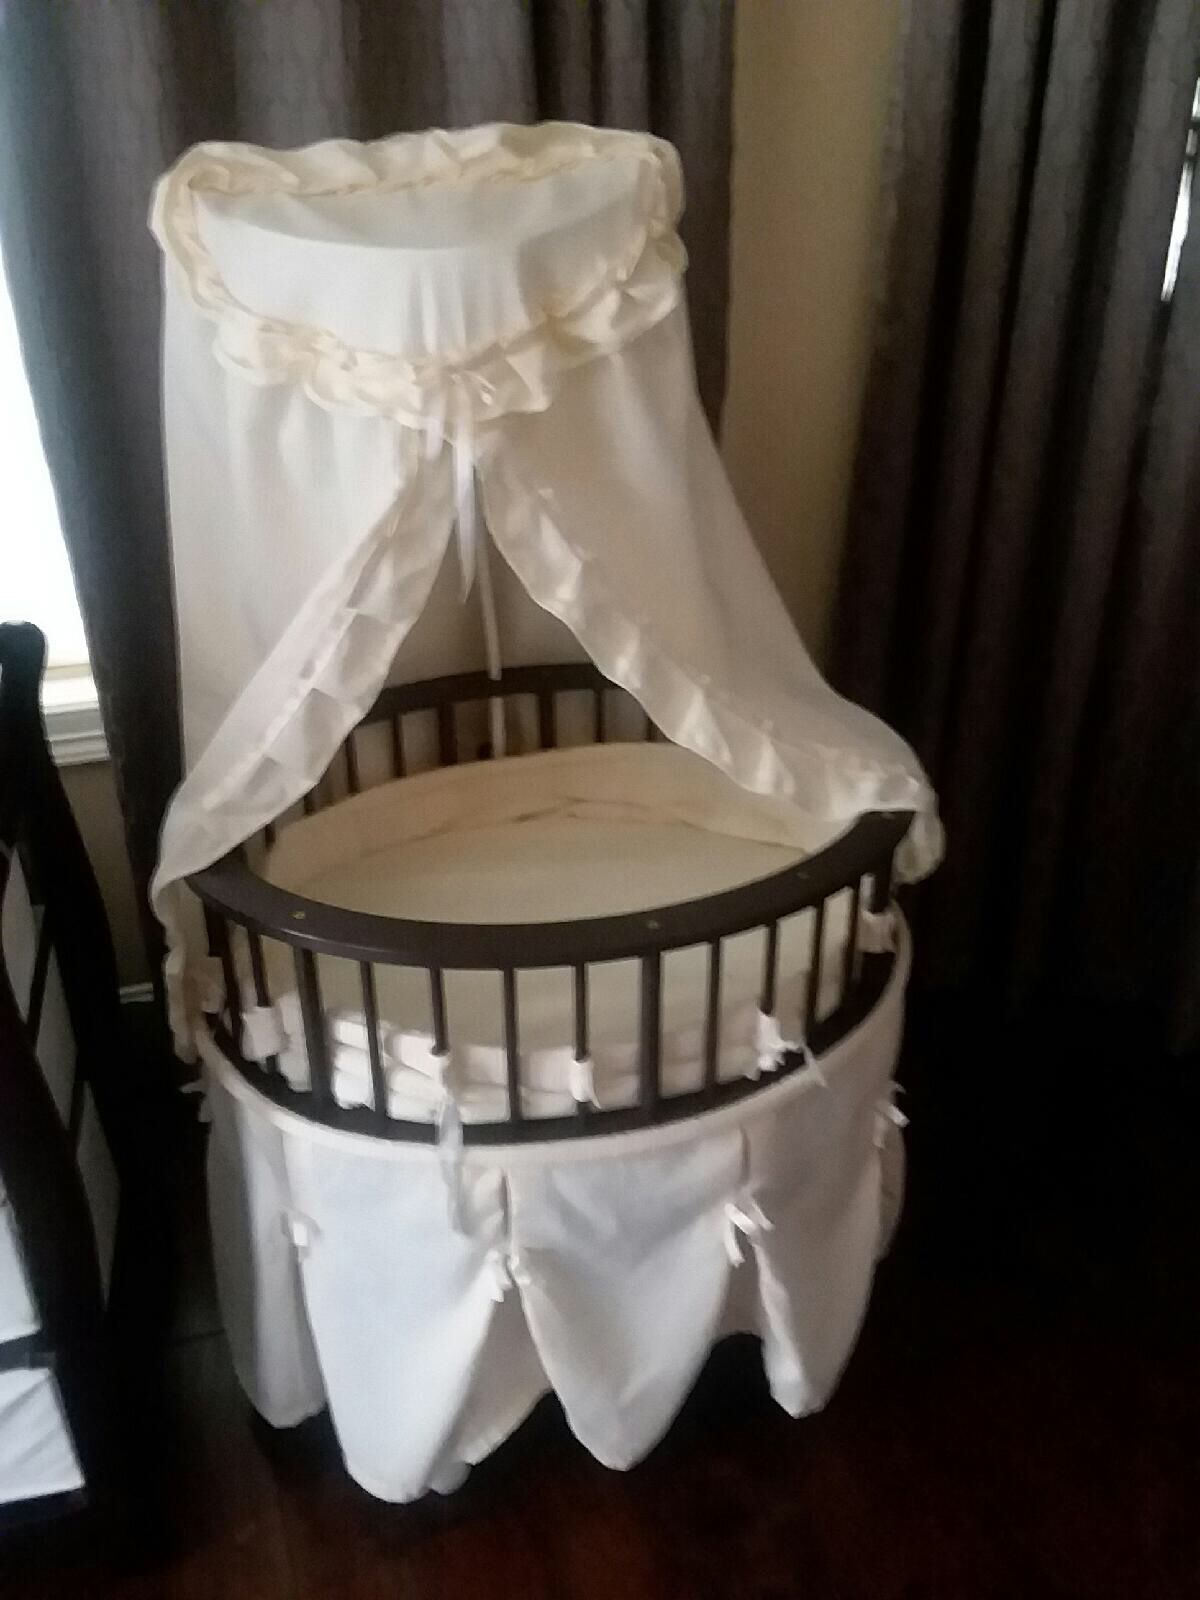 Barely used baby items for sale